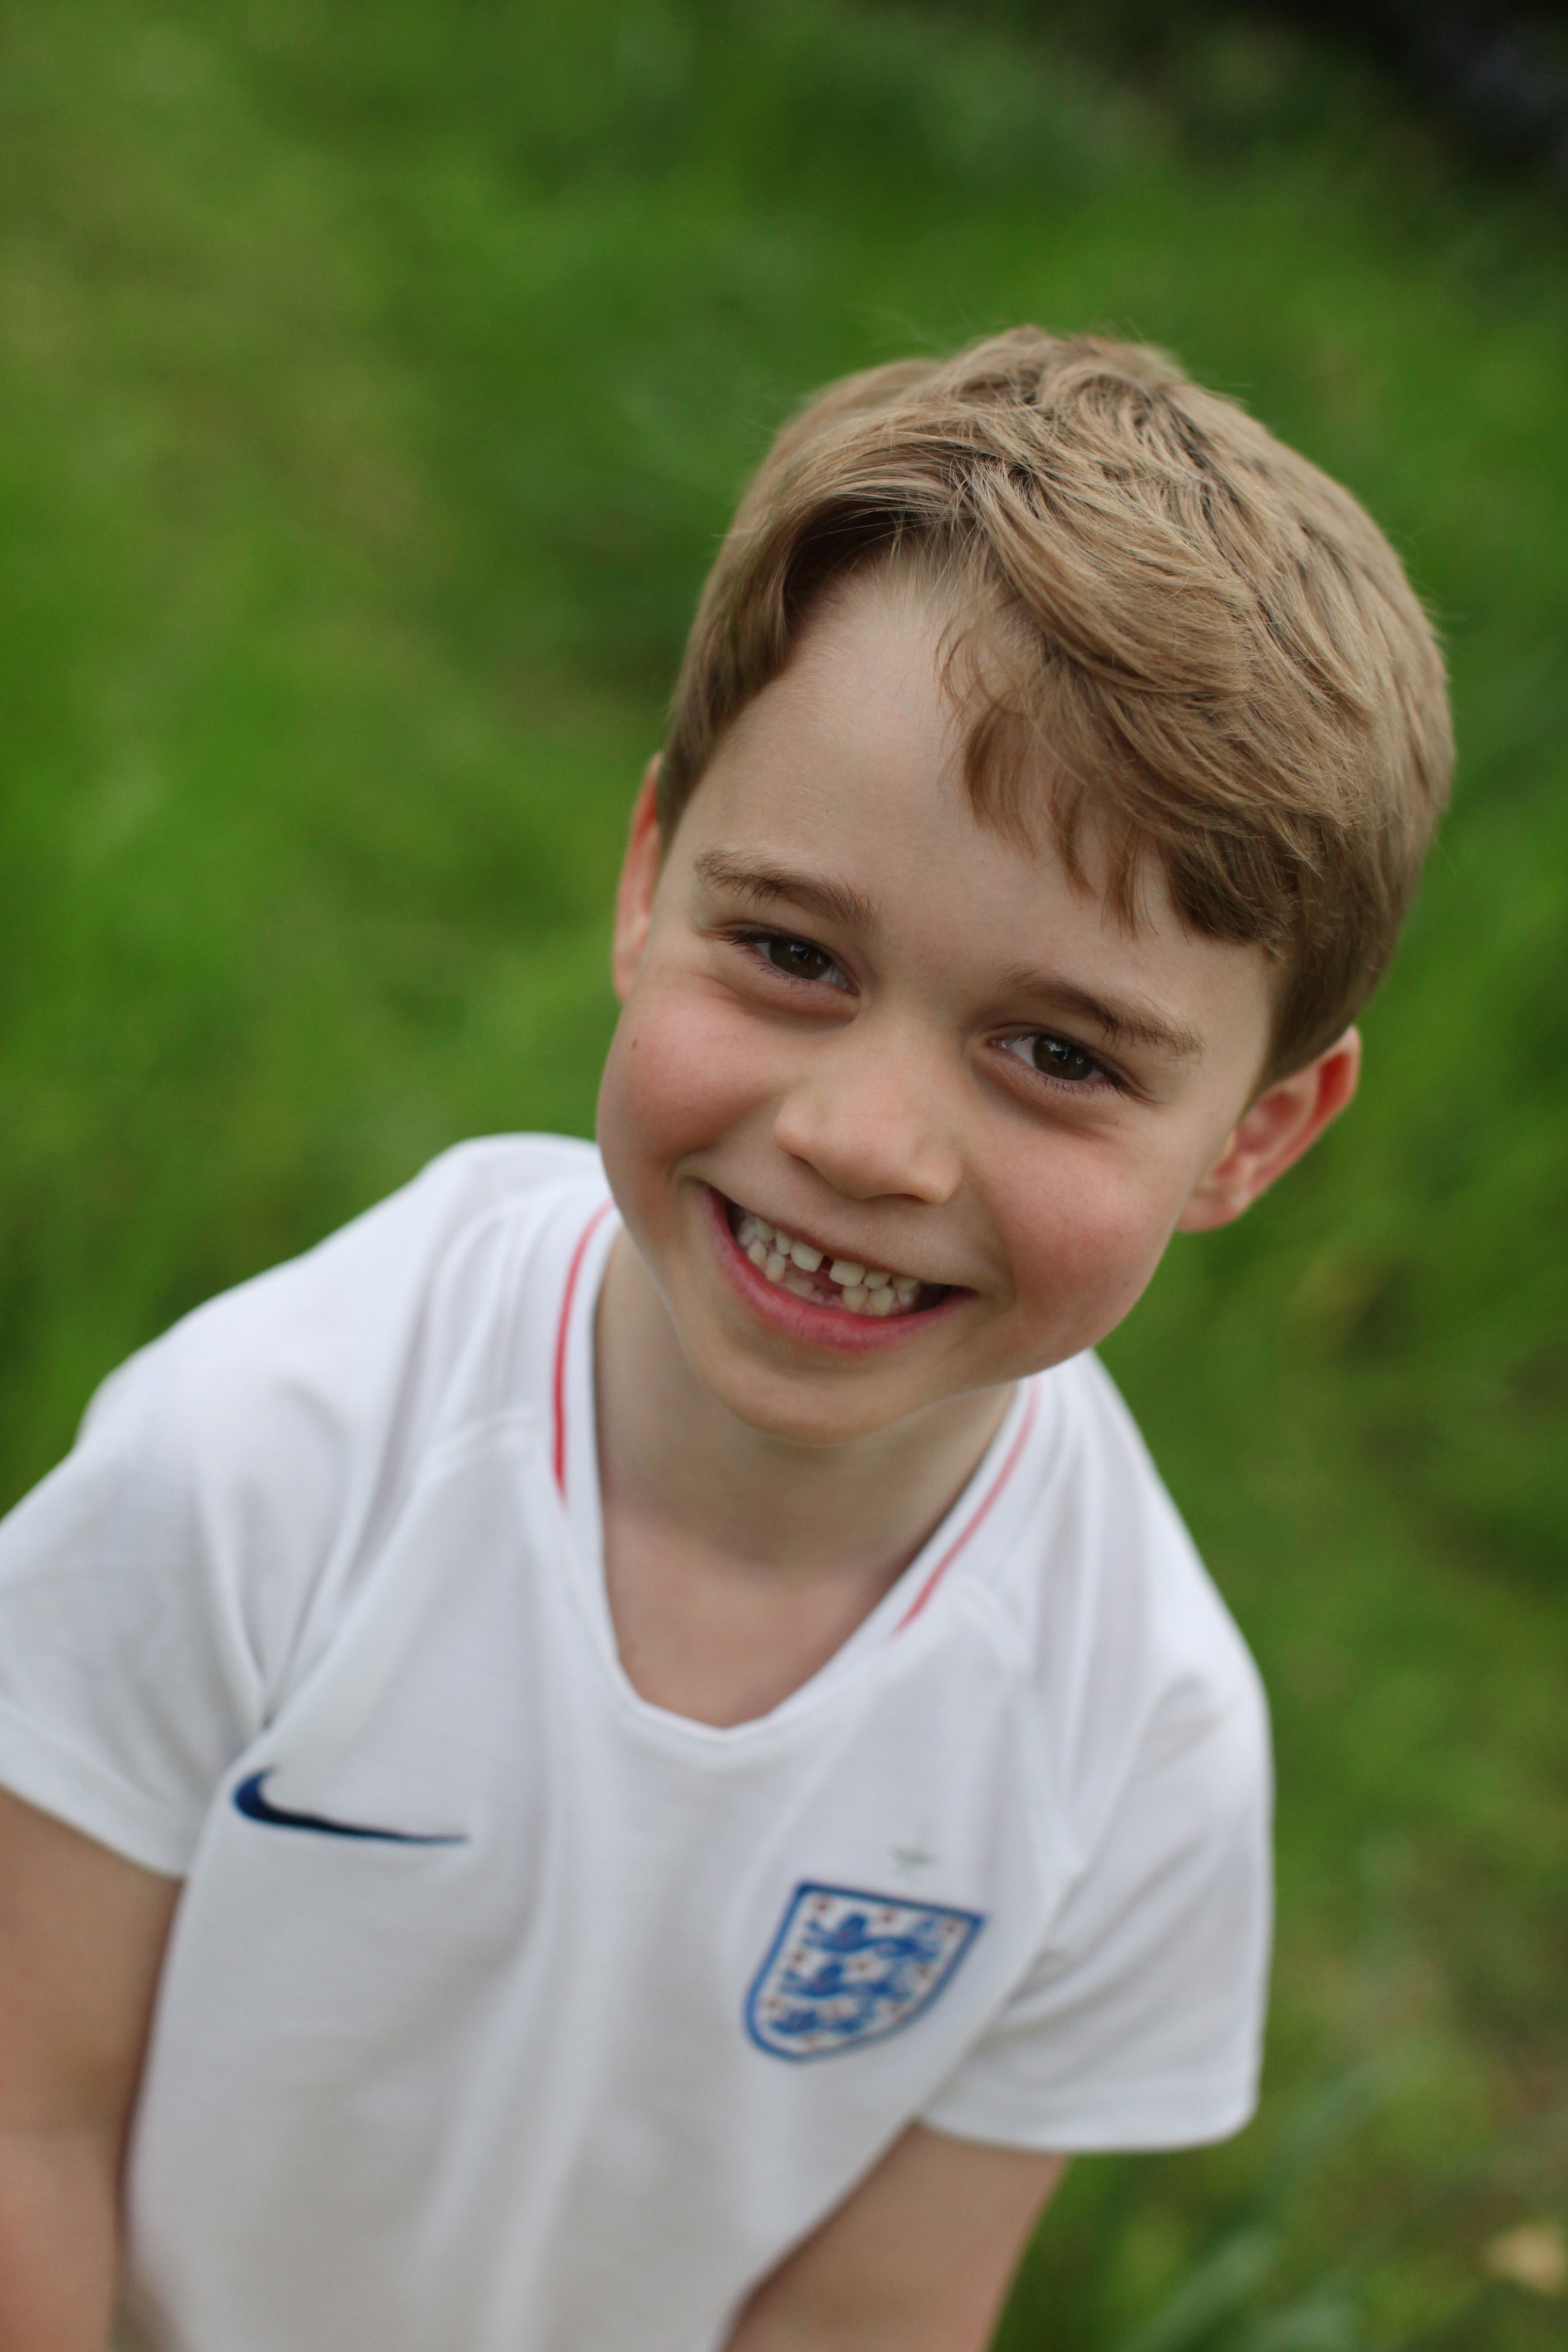 <p>Prince George is seen smiling in a photo taken by his mother in the garden at Kensington Palace to celebrate his 6th birthday on July 22, 2019.</p>